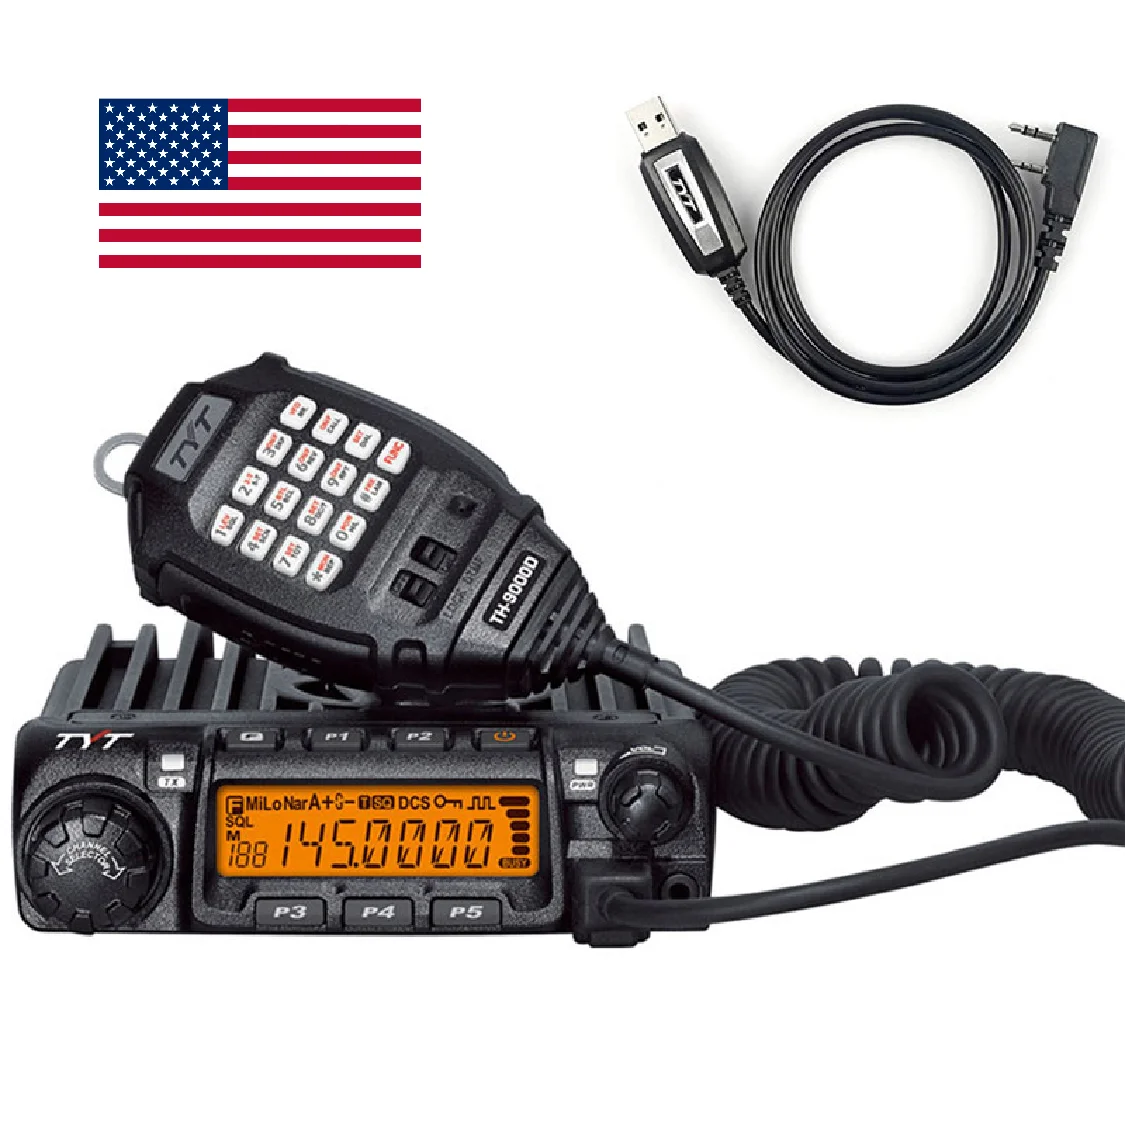 

TYT Mobile TH-9000D Upgraded VOX Noise Reduction Single Band Transceiver Amateur Radio w/ Programming Cable